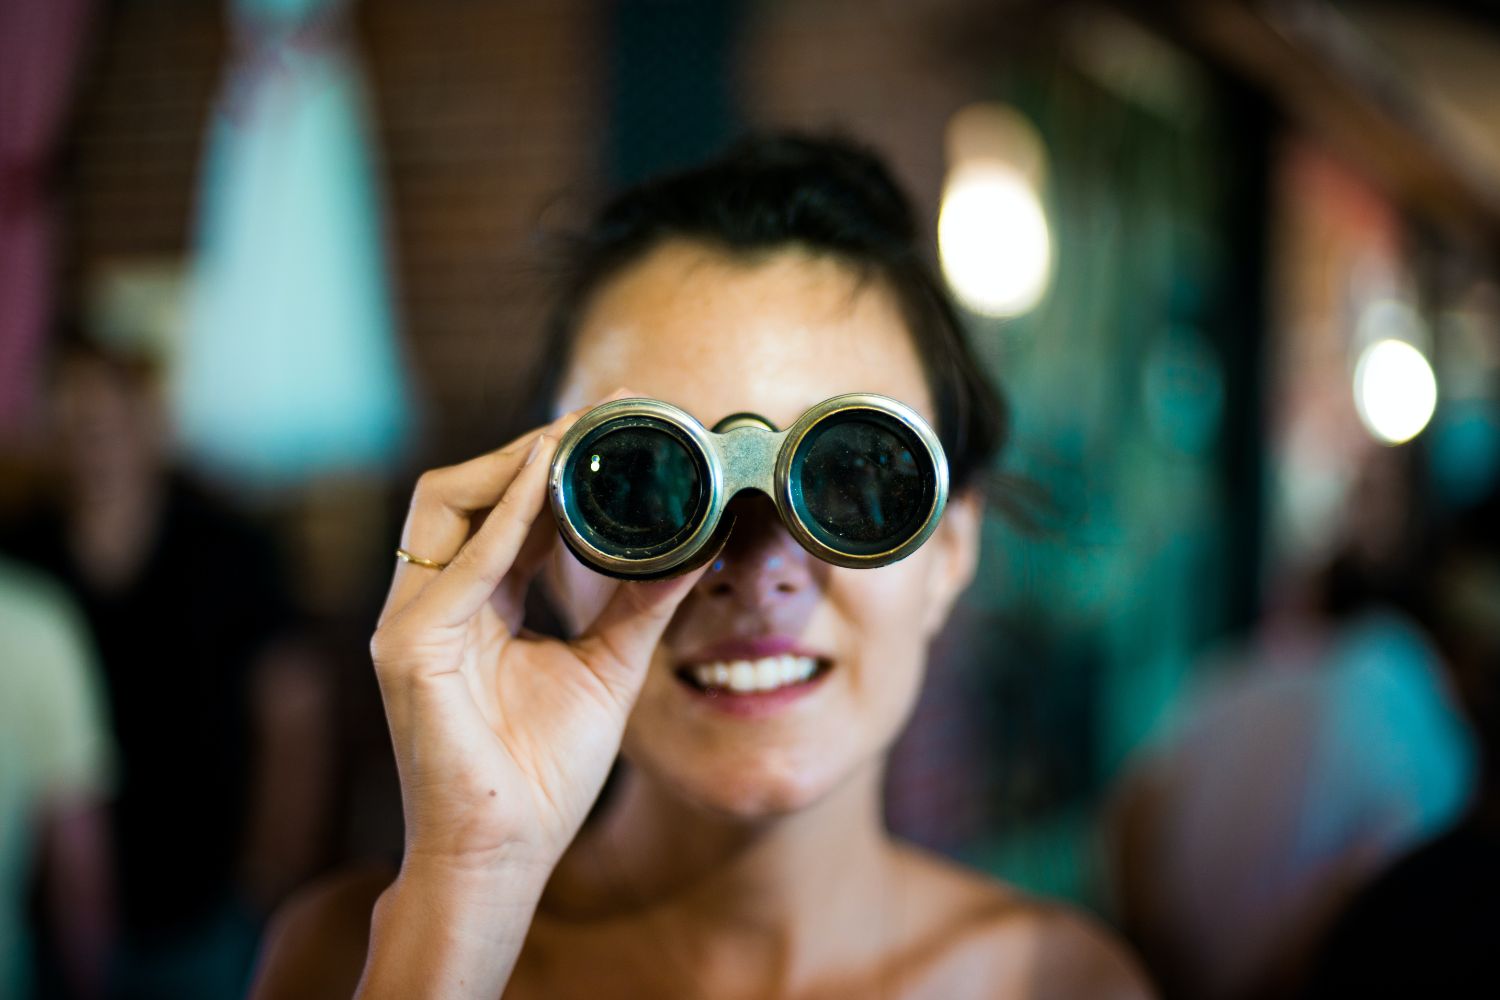 woman takes photos with binoculars camera Photo by Chase Clark on unsplash